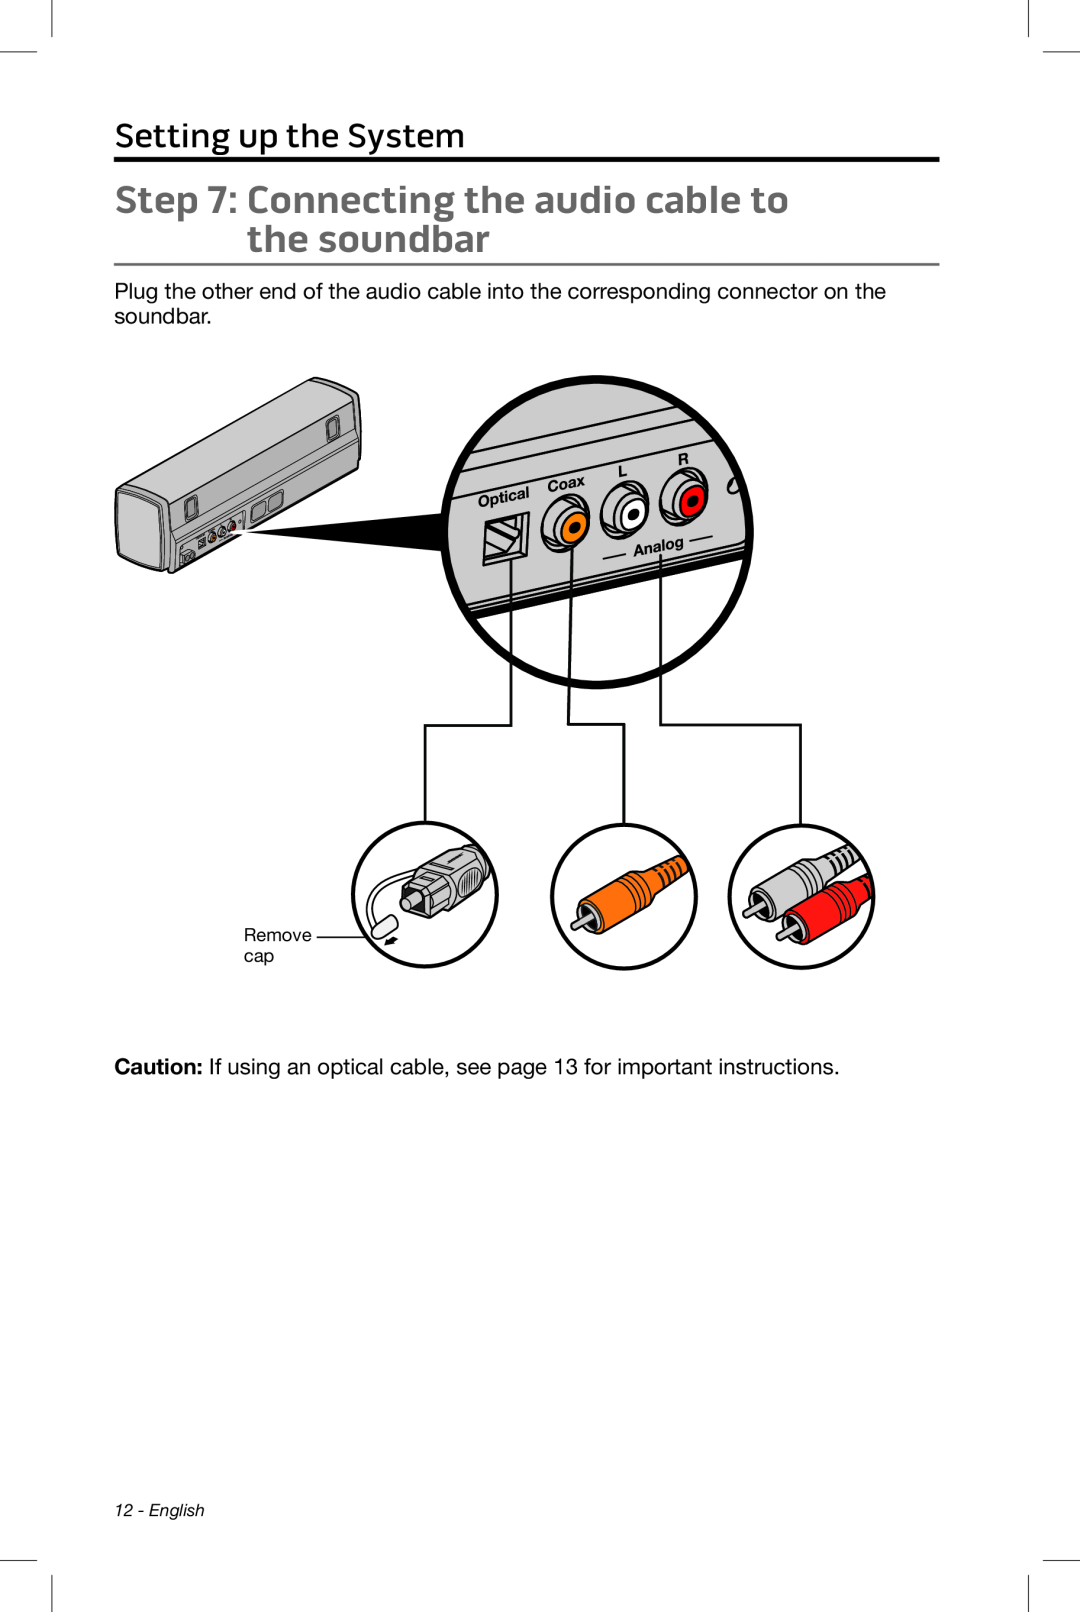 Bose CineMate 15/10 manual Setting up the System, English 